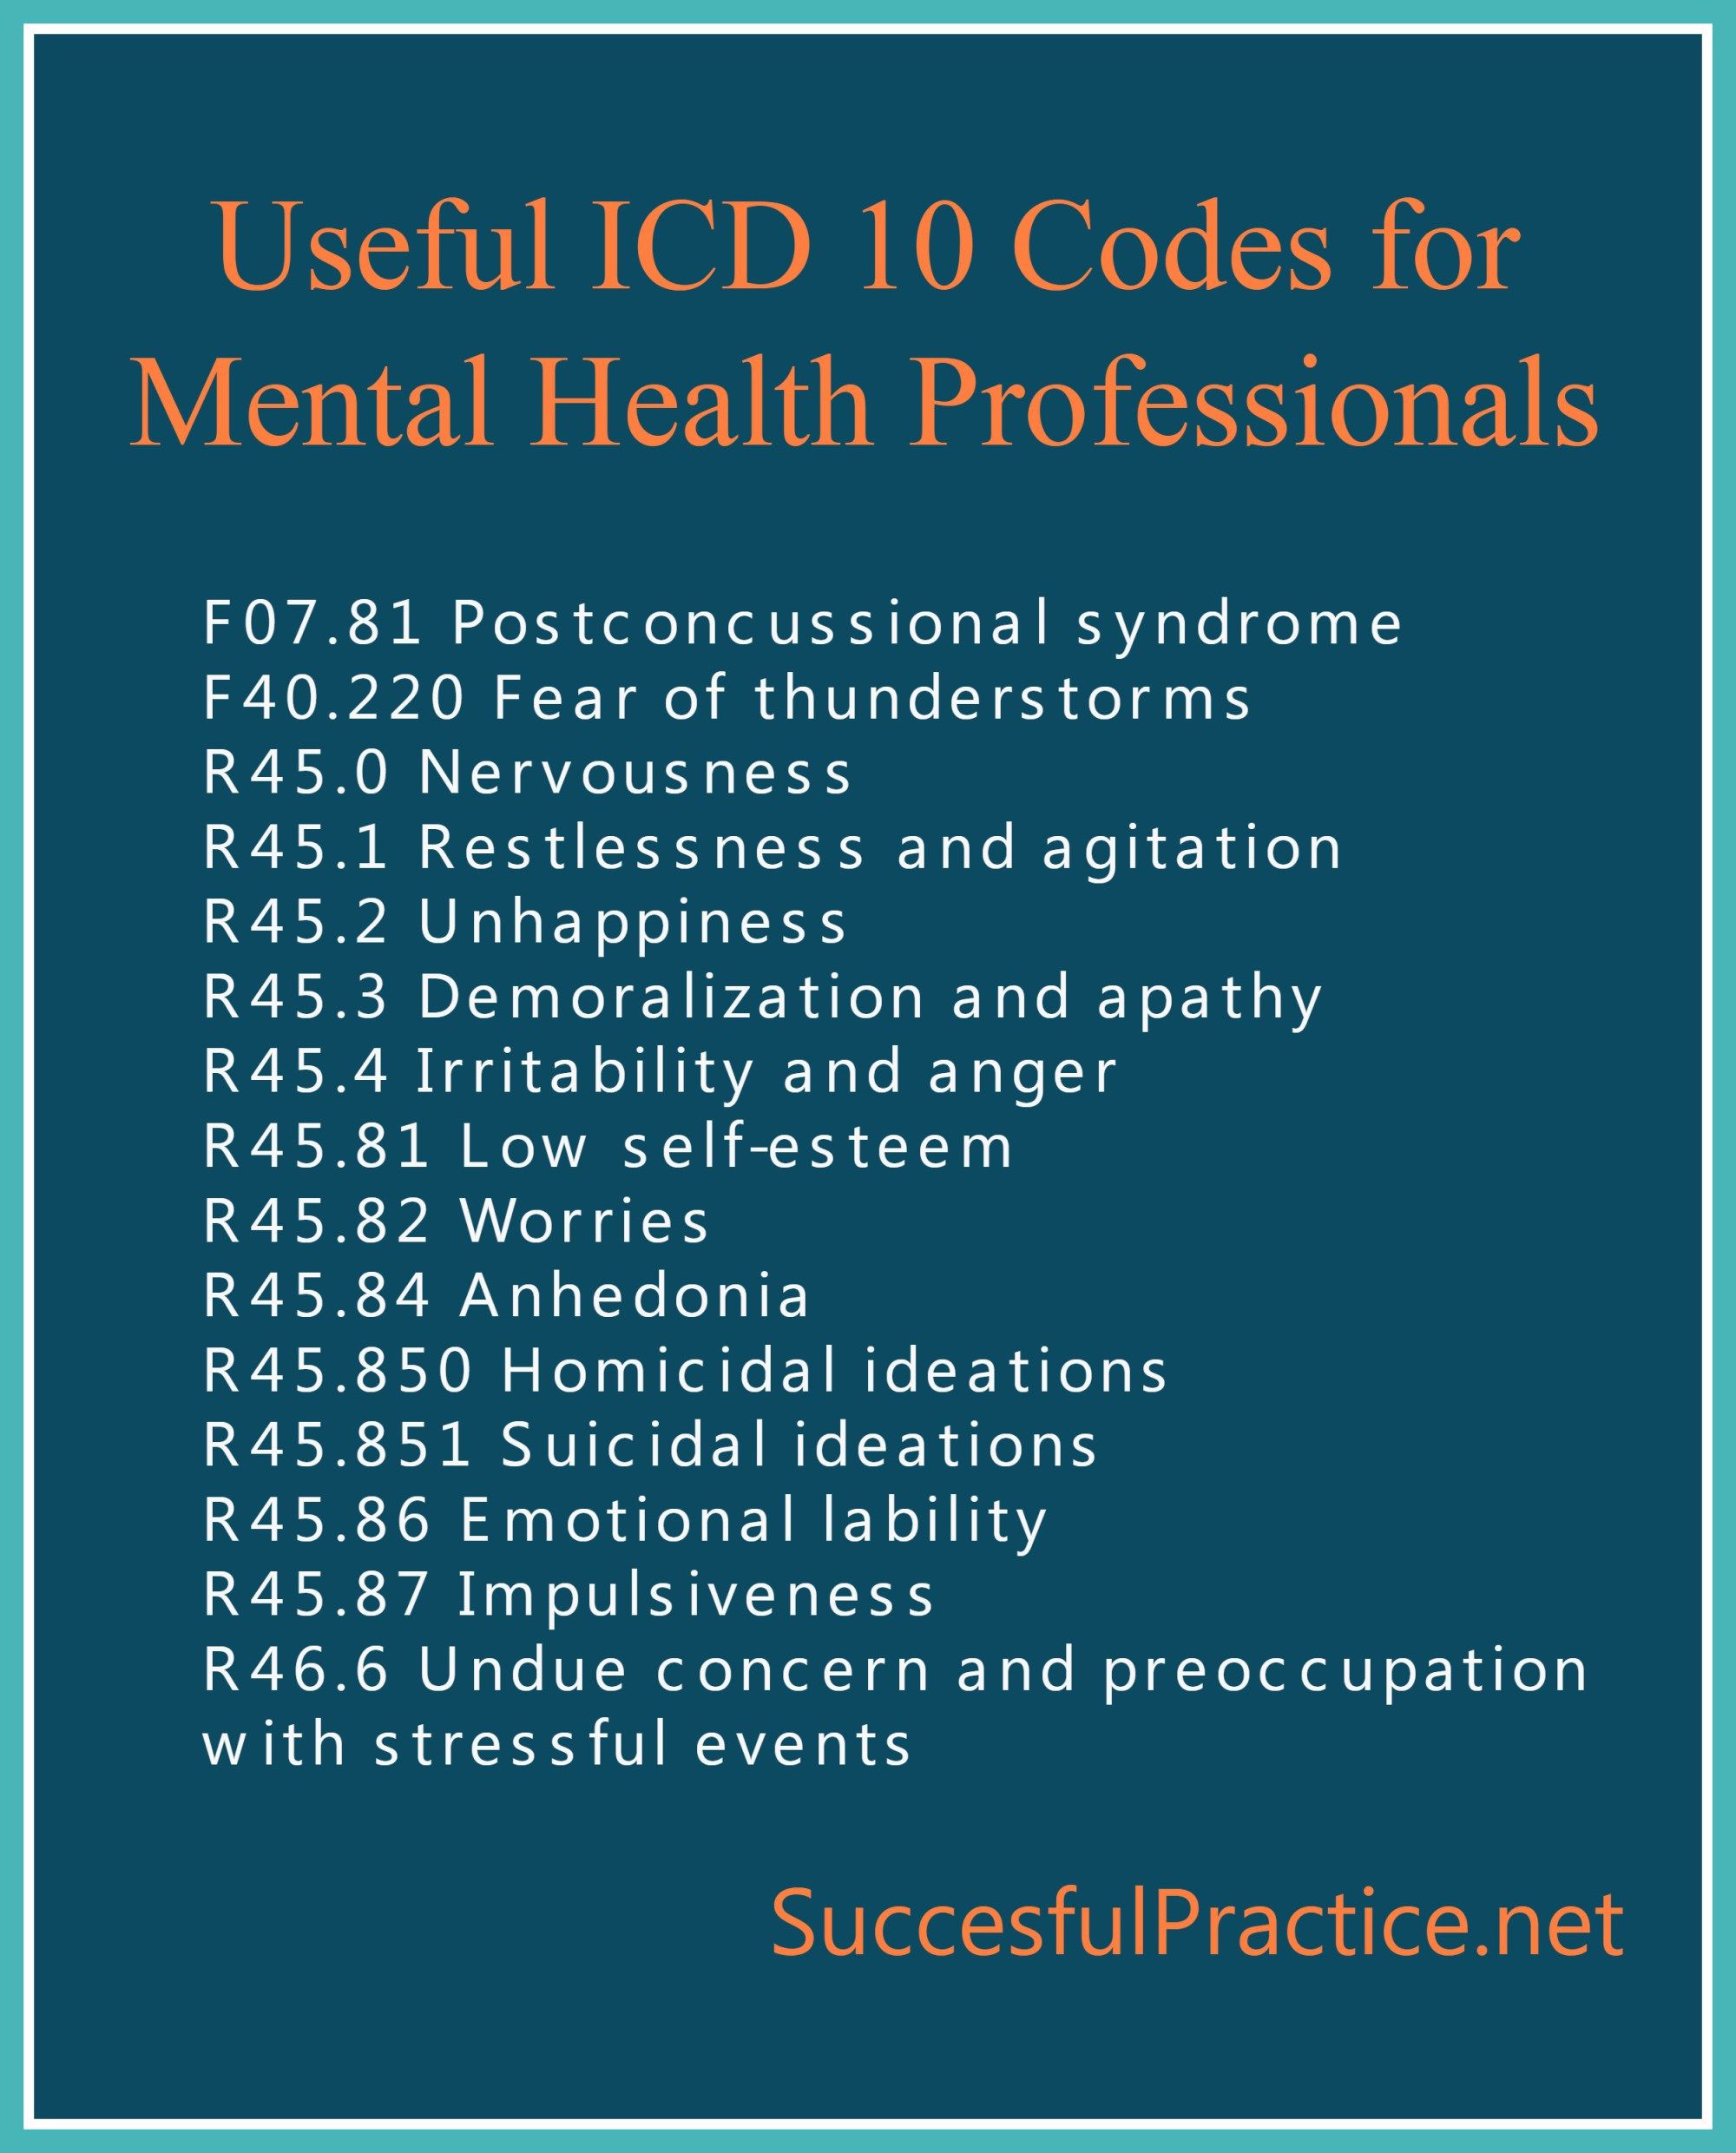 Depression With Anxiety Icd 10